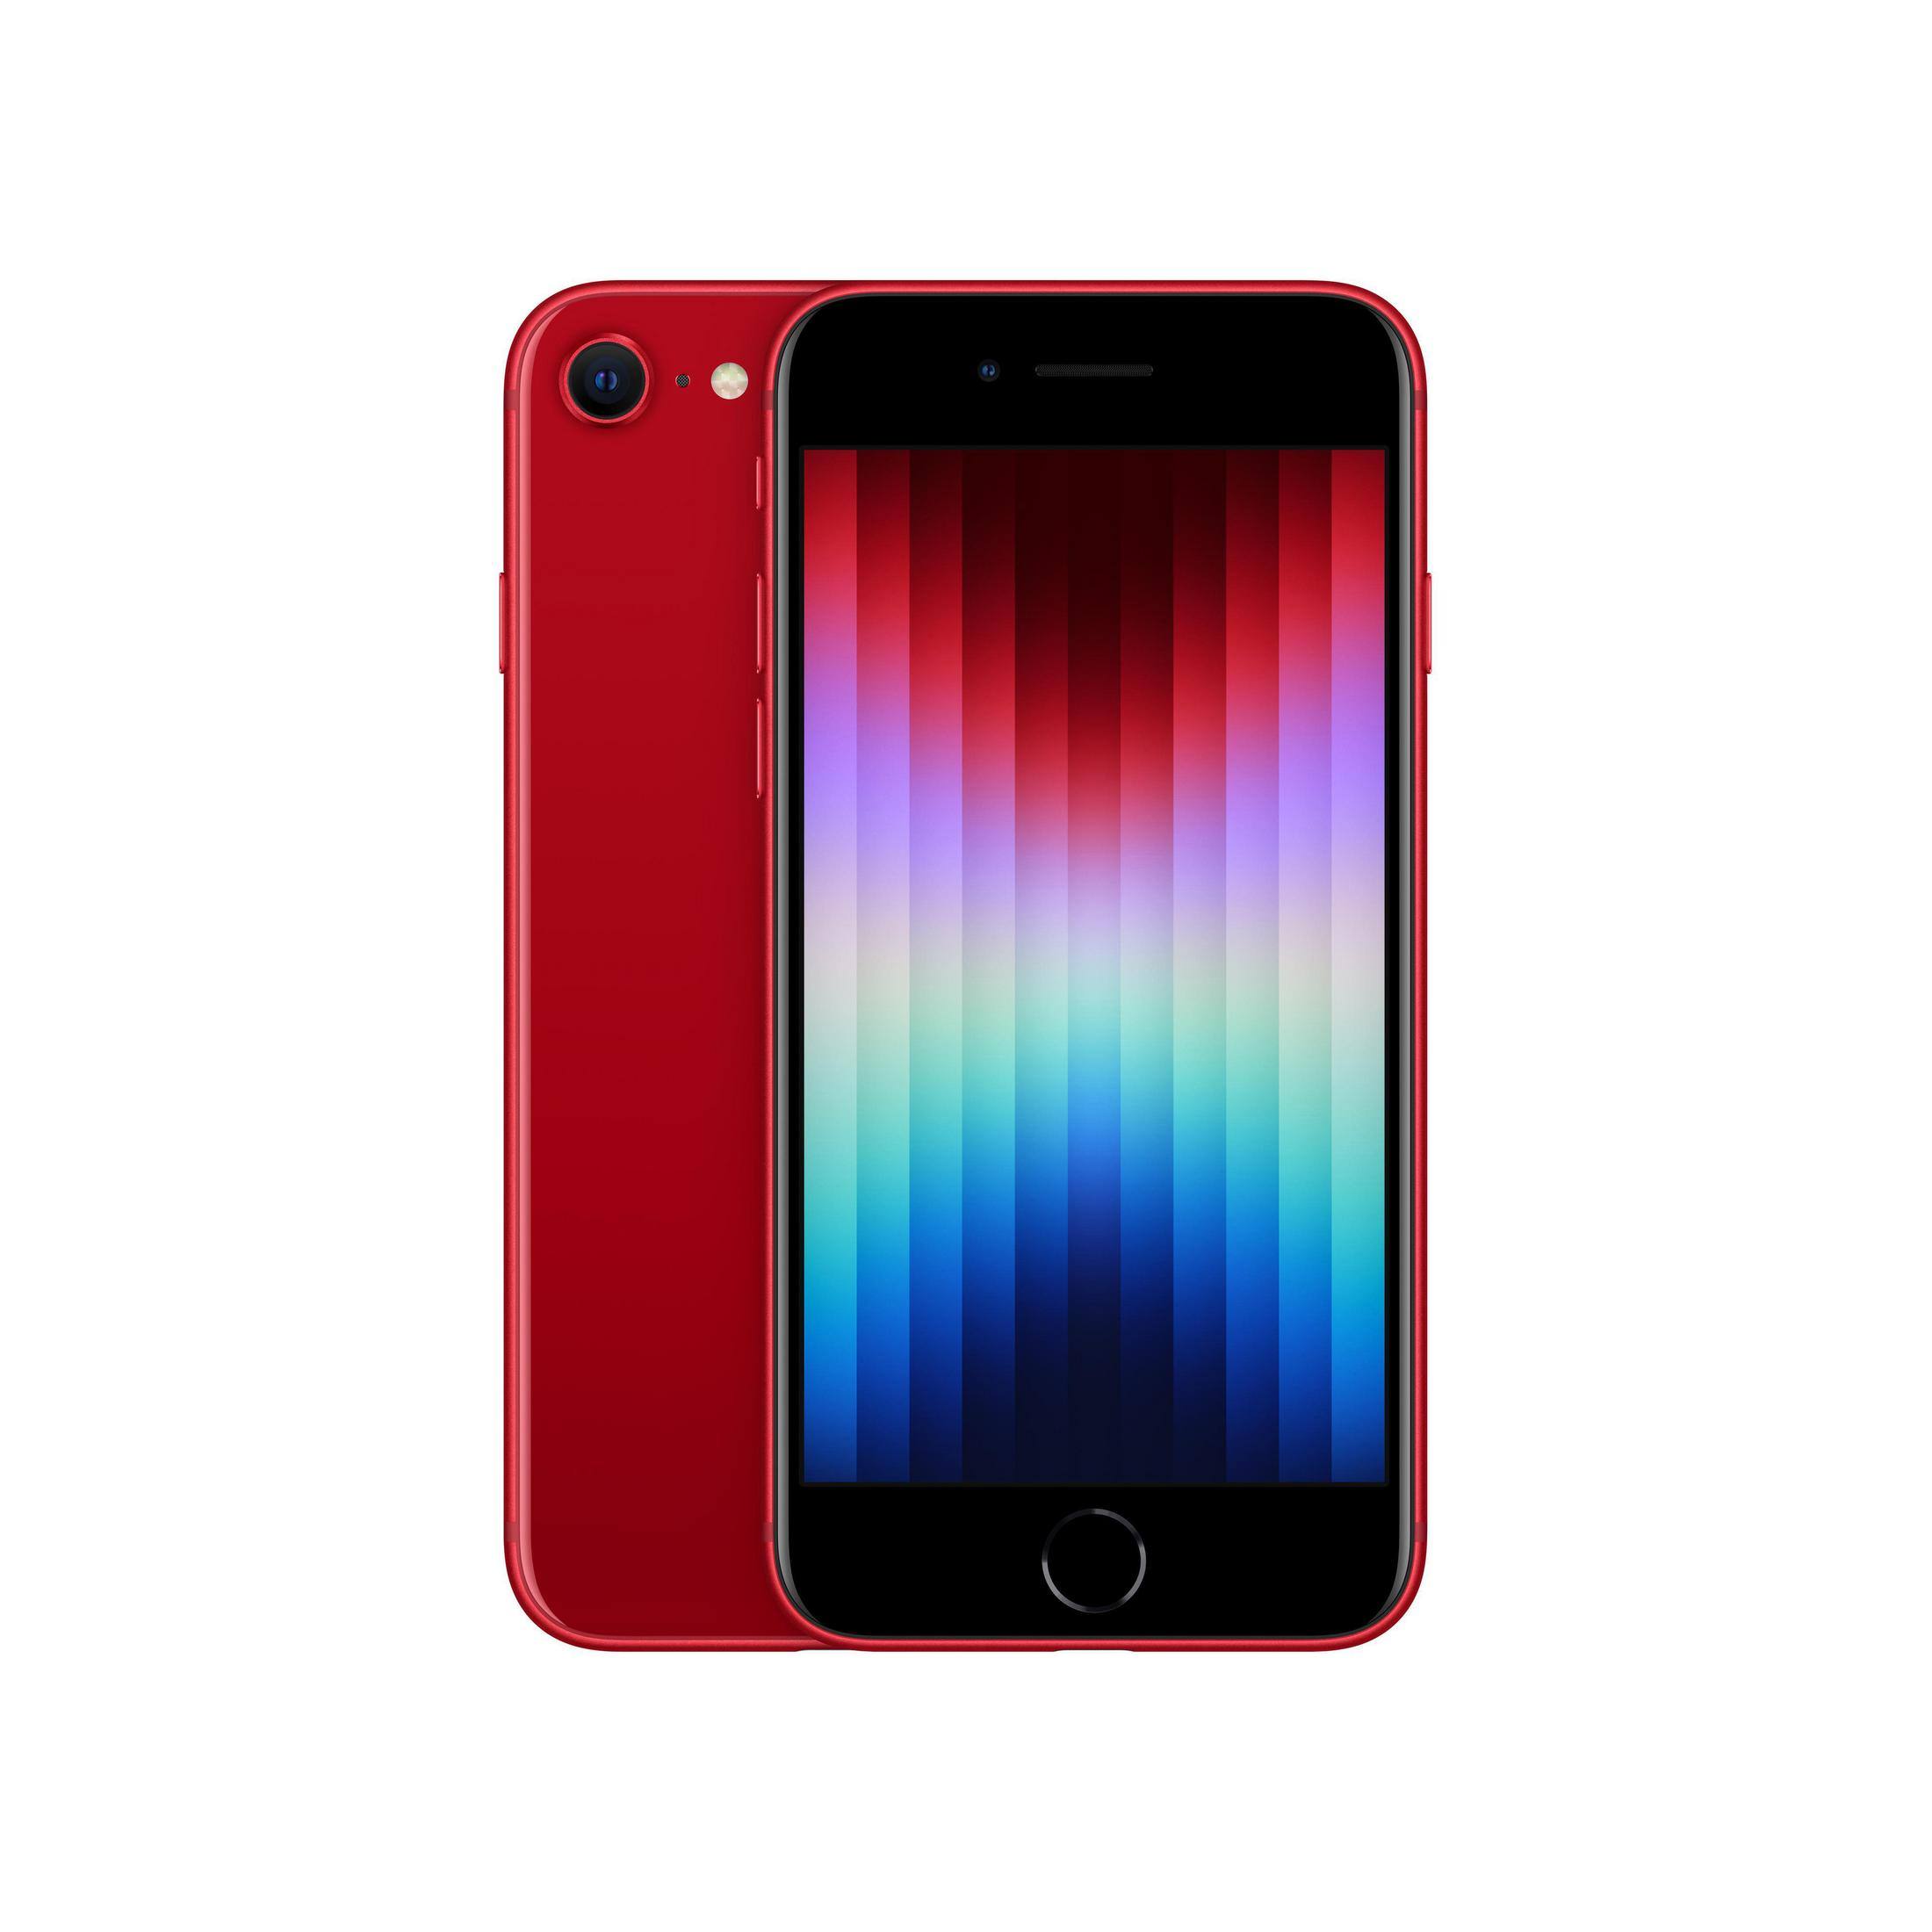 APPLE IPHONE SE 256GB (PRODUCT) RED 256 GB Red (Product)